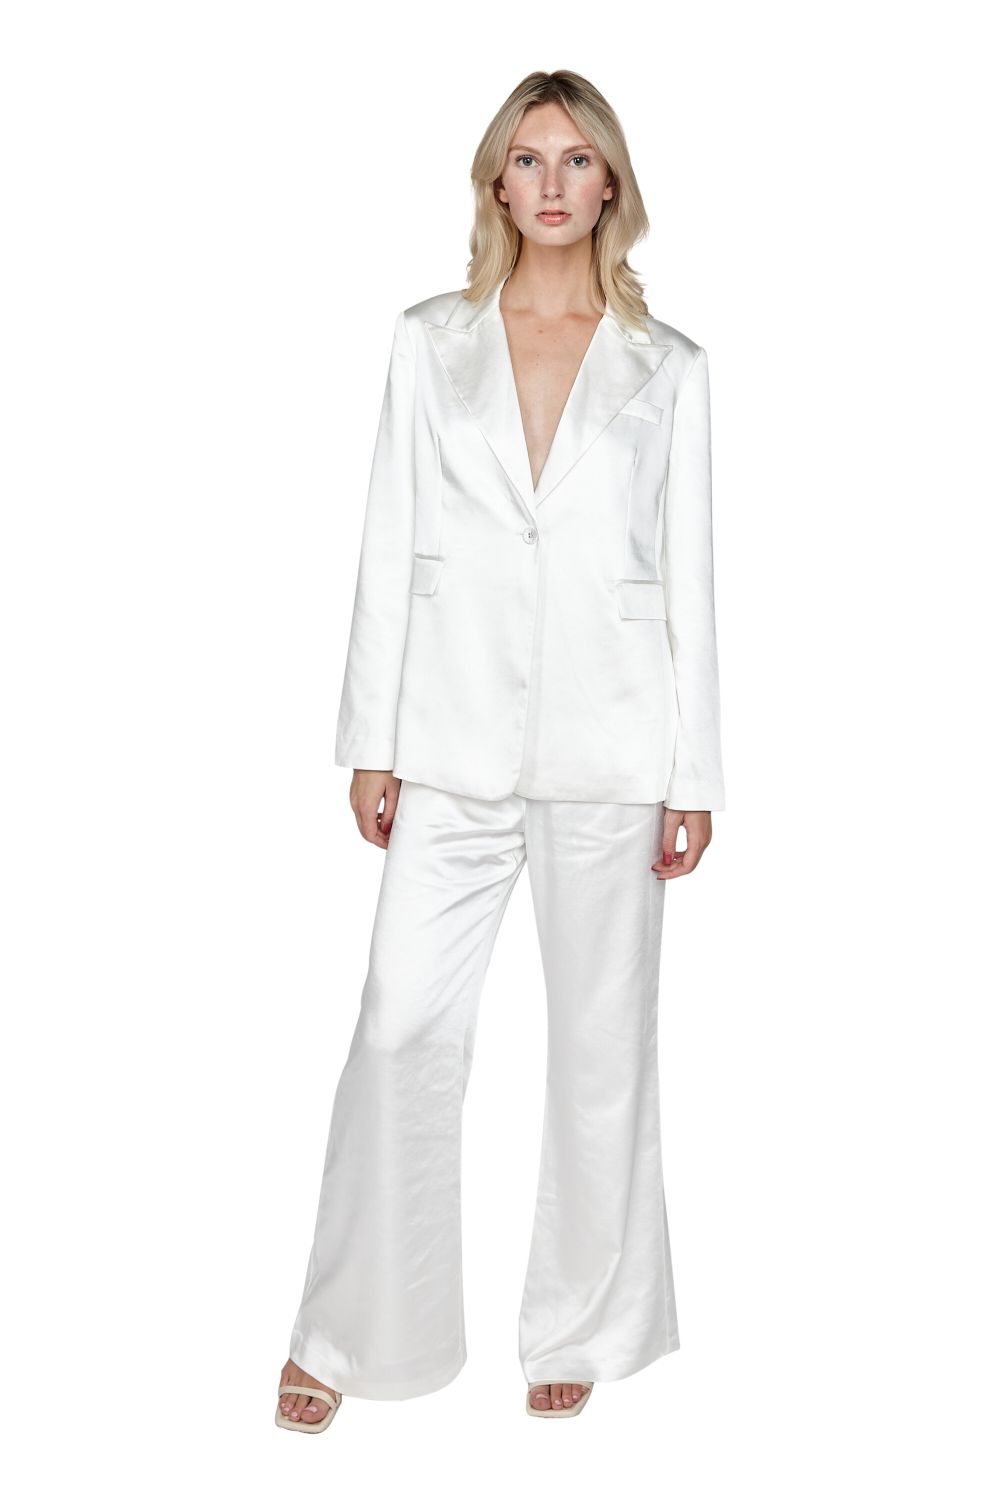 Satin Tailored Blazer and Flare Trouser Set